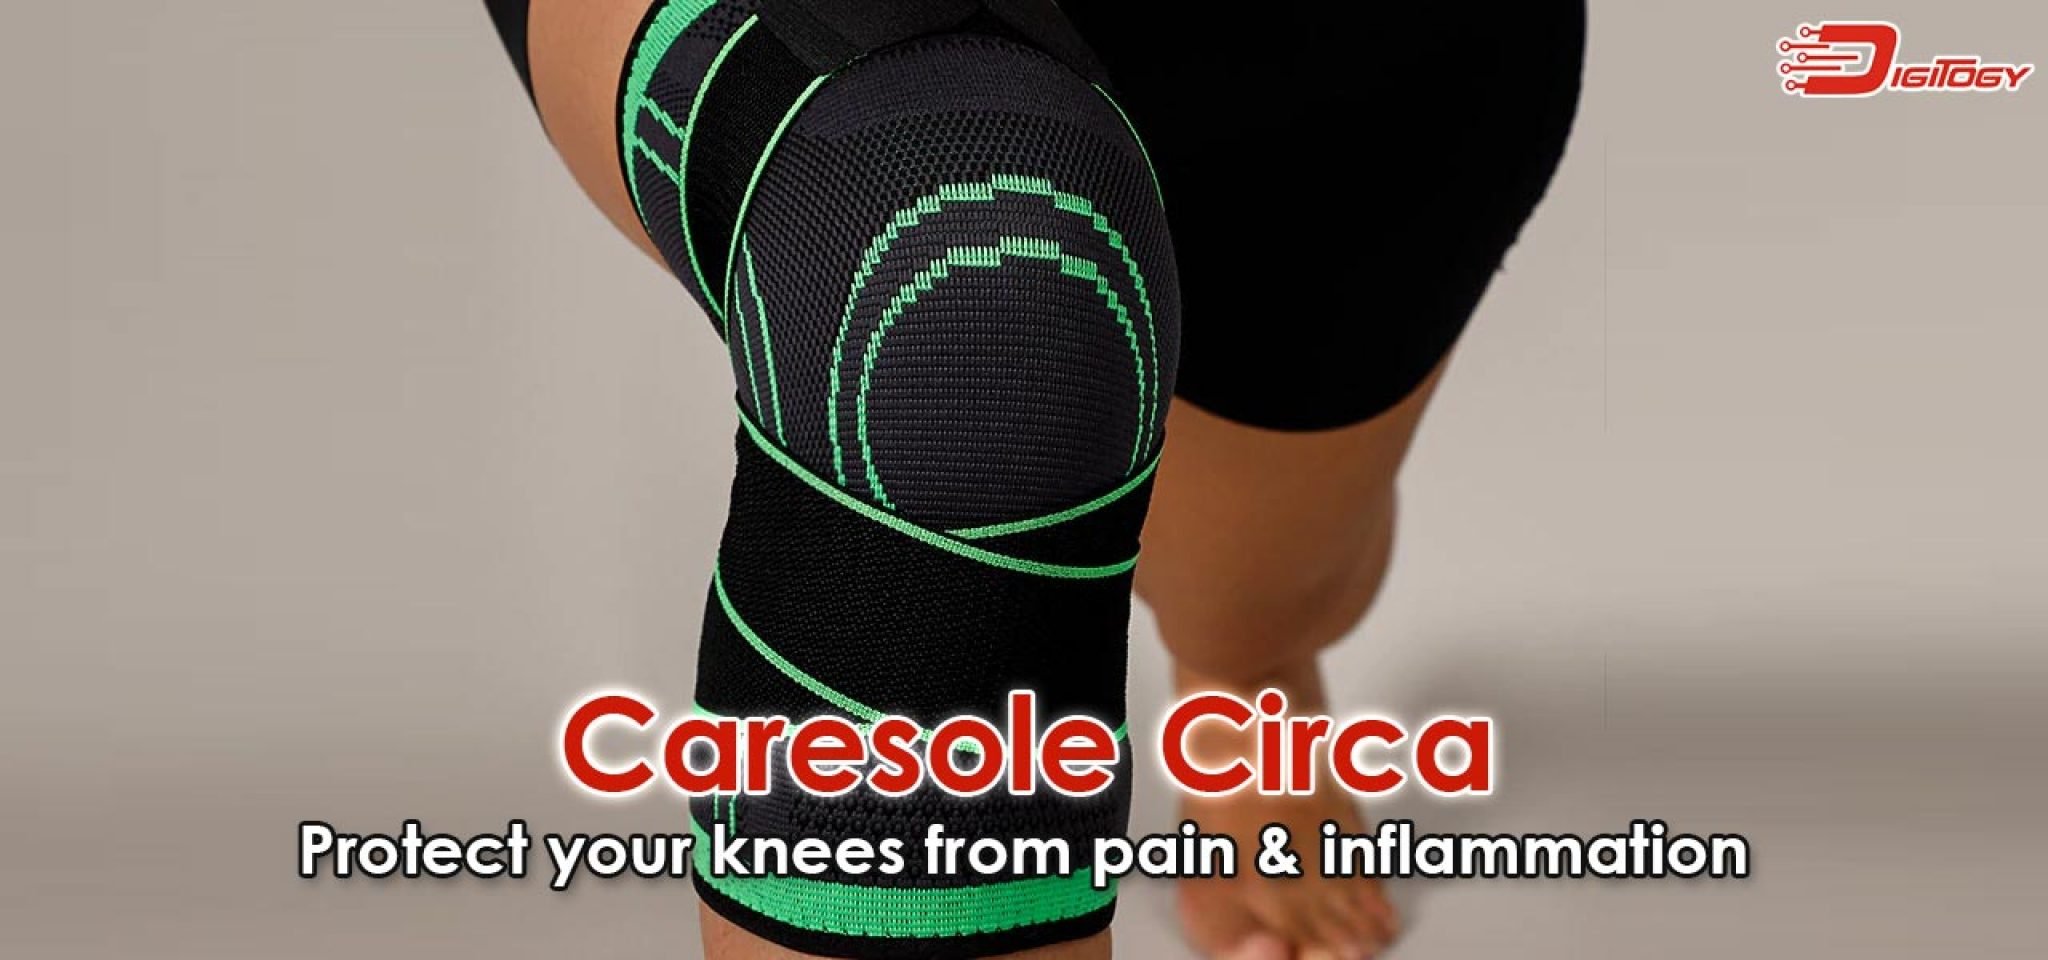 Caresole Knee Sleeve Review 2021: is it really worth it?